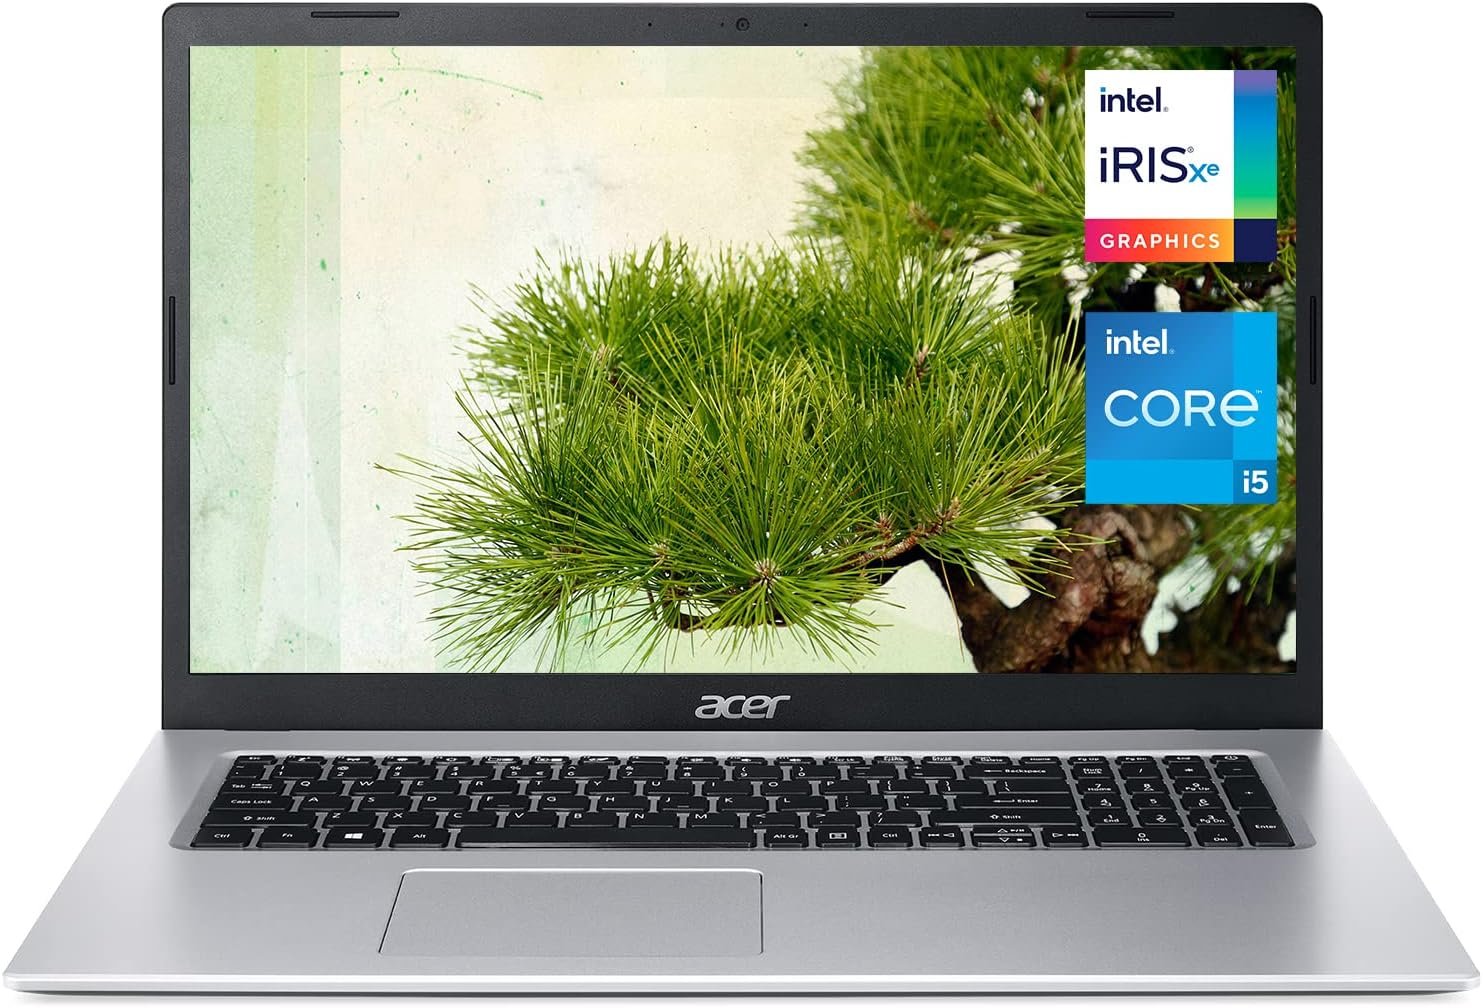 Acer Aspire 3 Laptop, 17.3 inch Full HD IPS Display